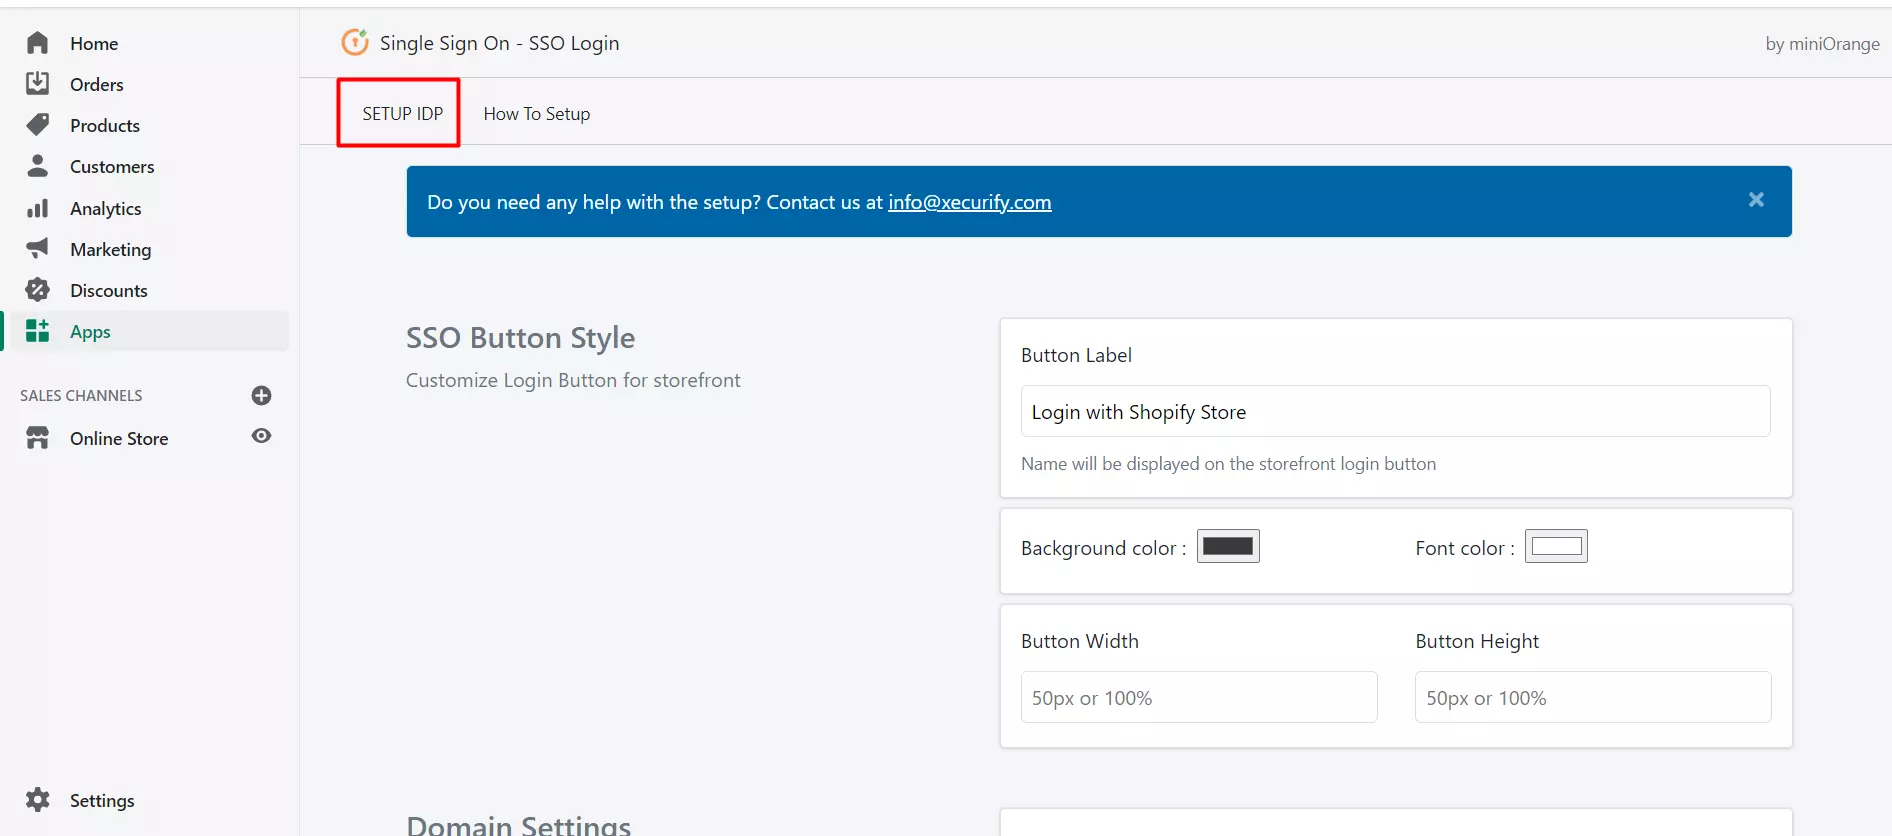 Shopify Single Sign-On (SSO) - Test Configuration on configured IDP